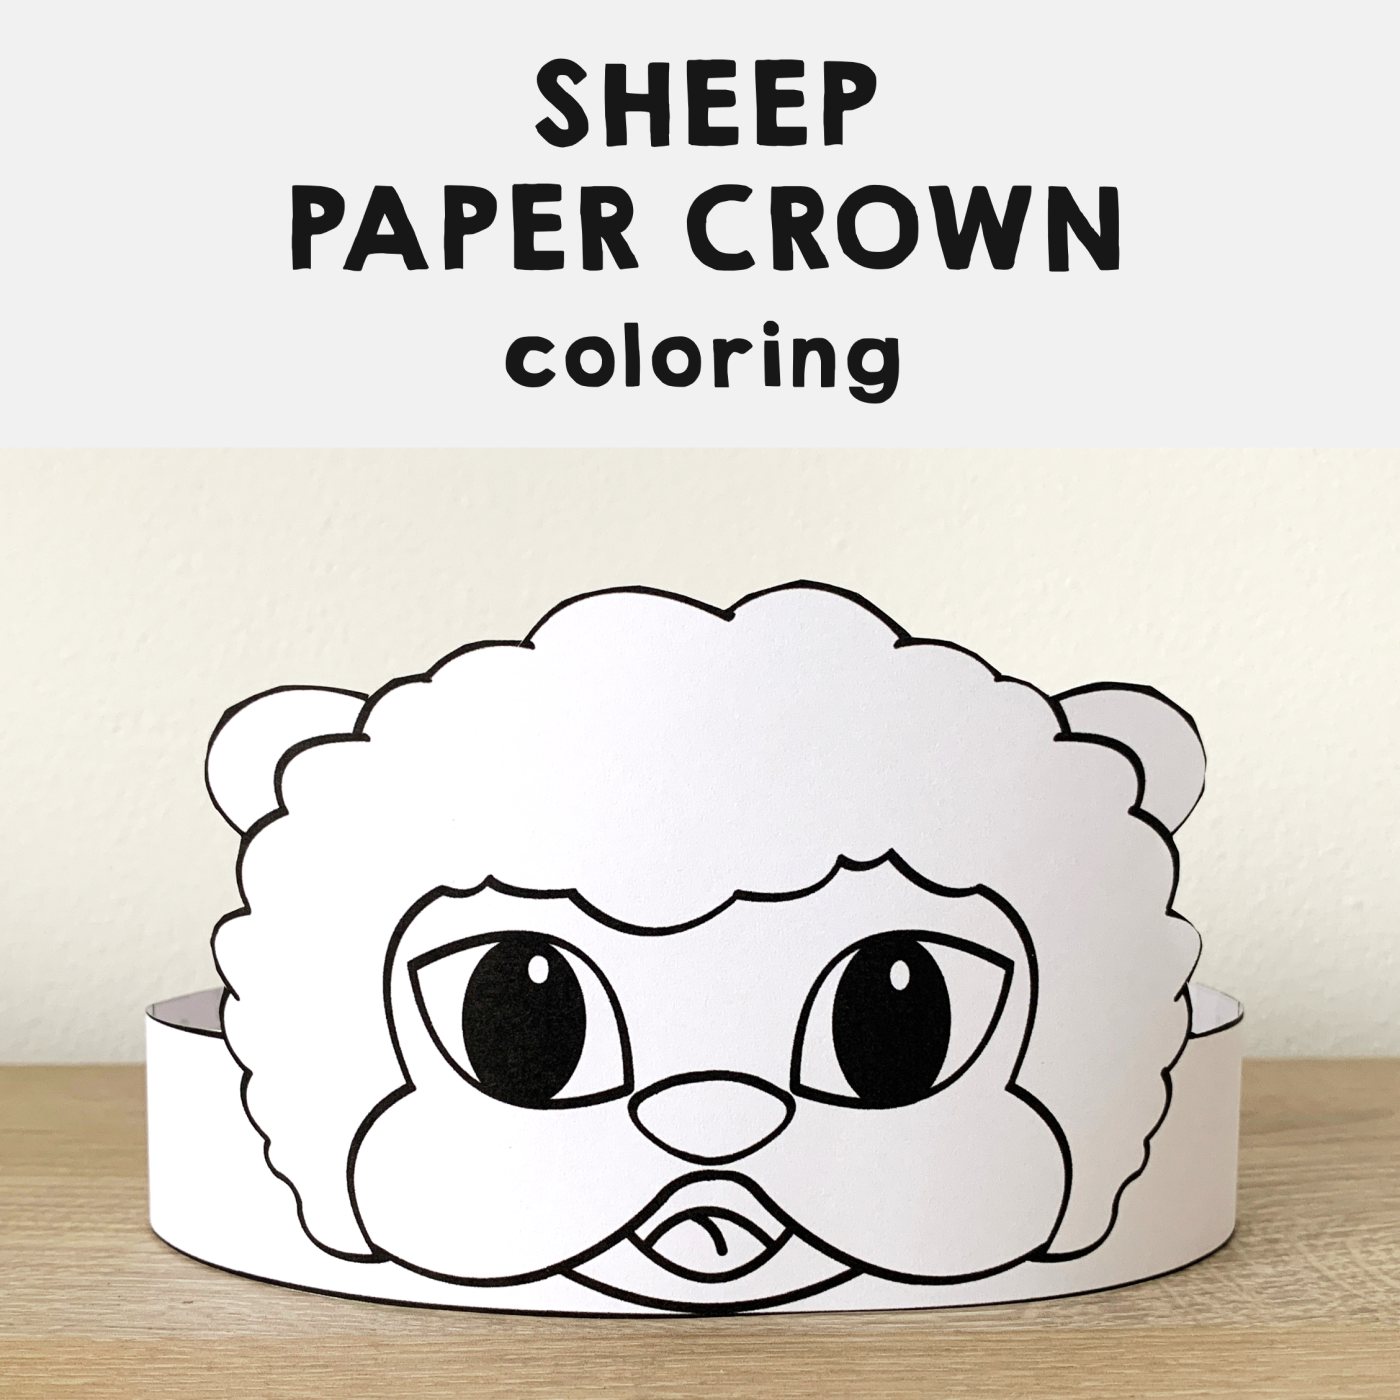 Sheep paper crown printable farm animal coloring craft made by teachers